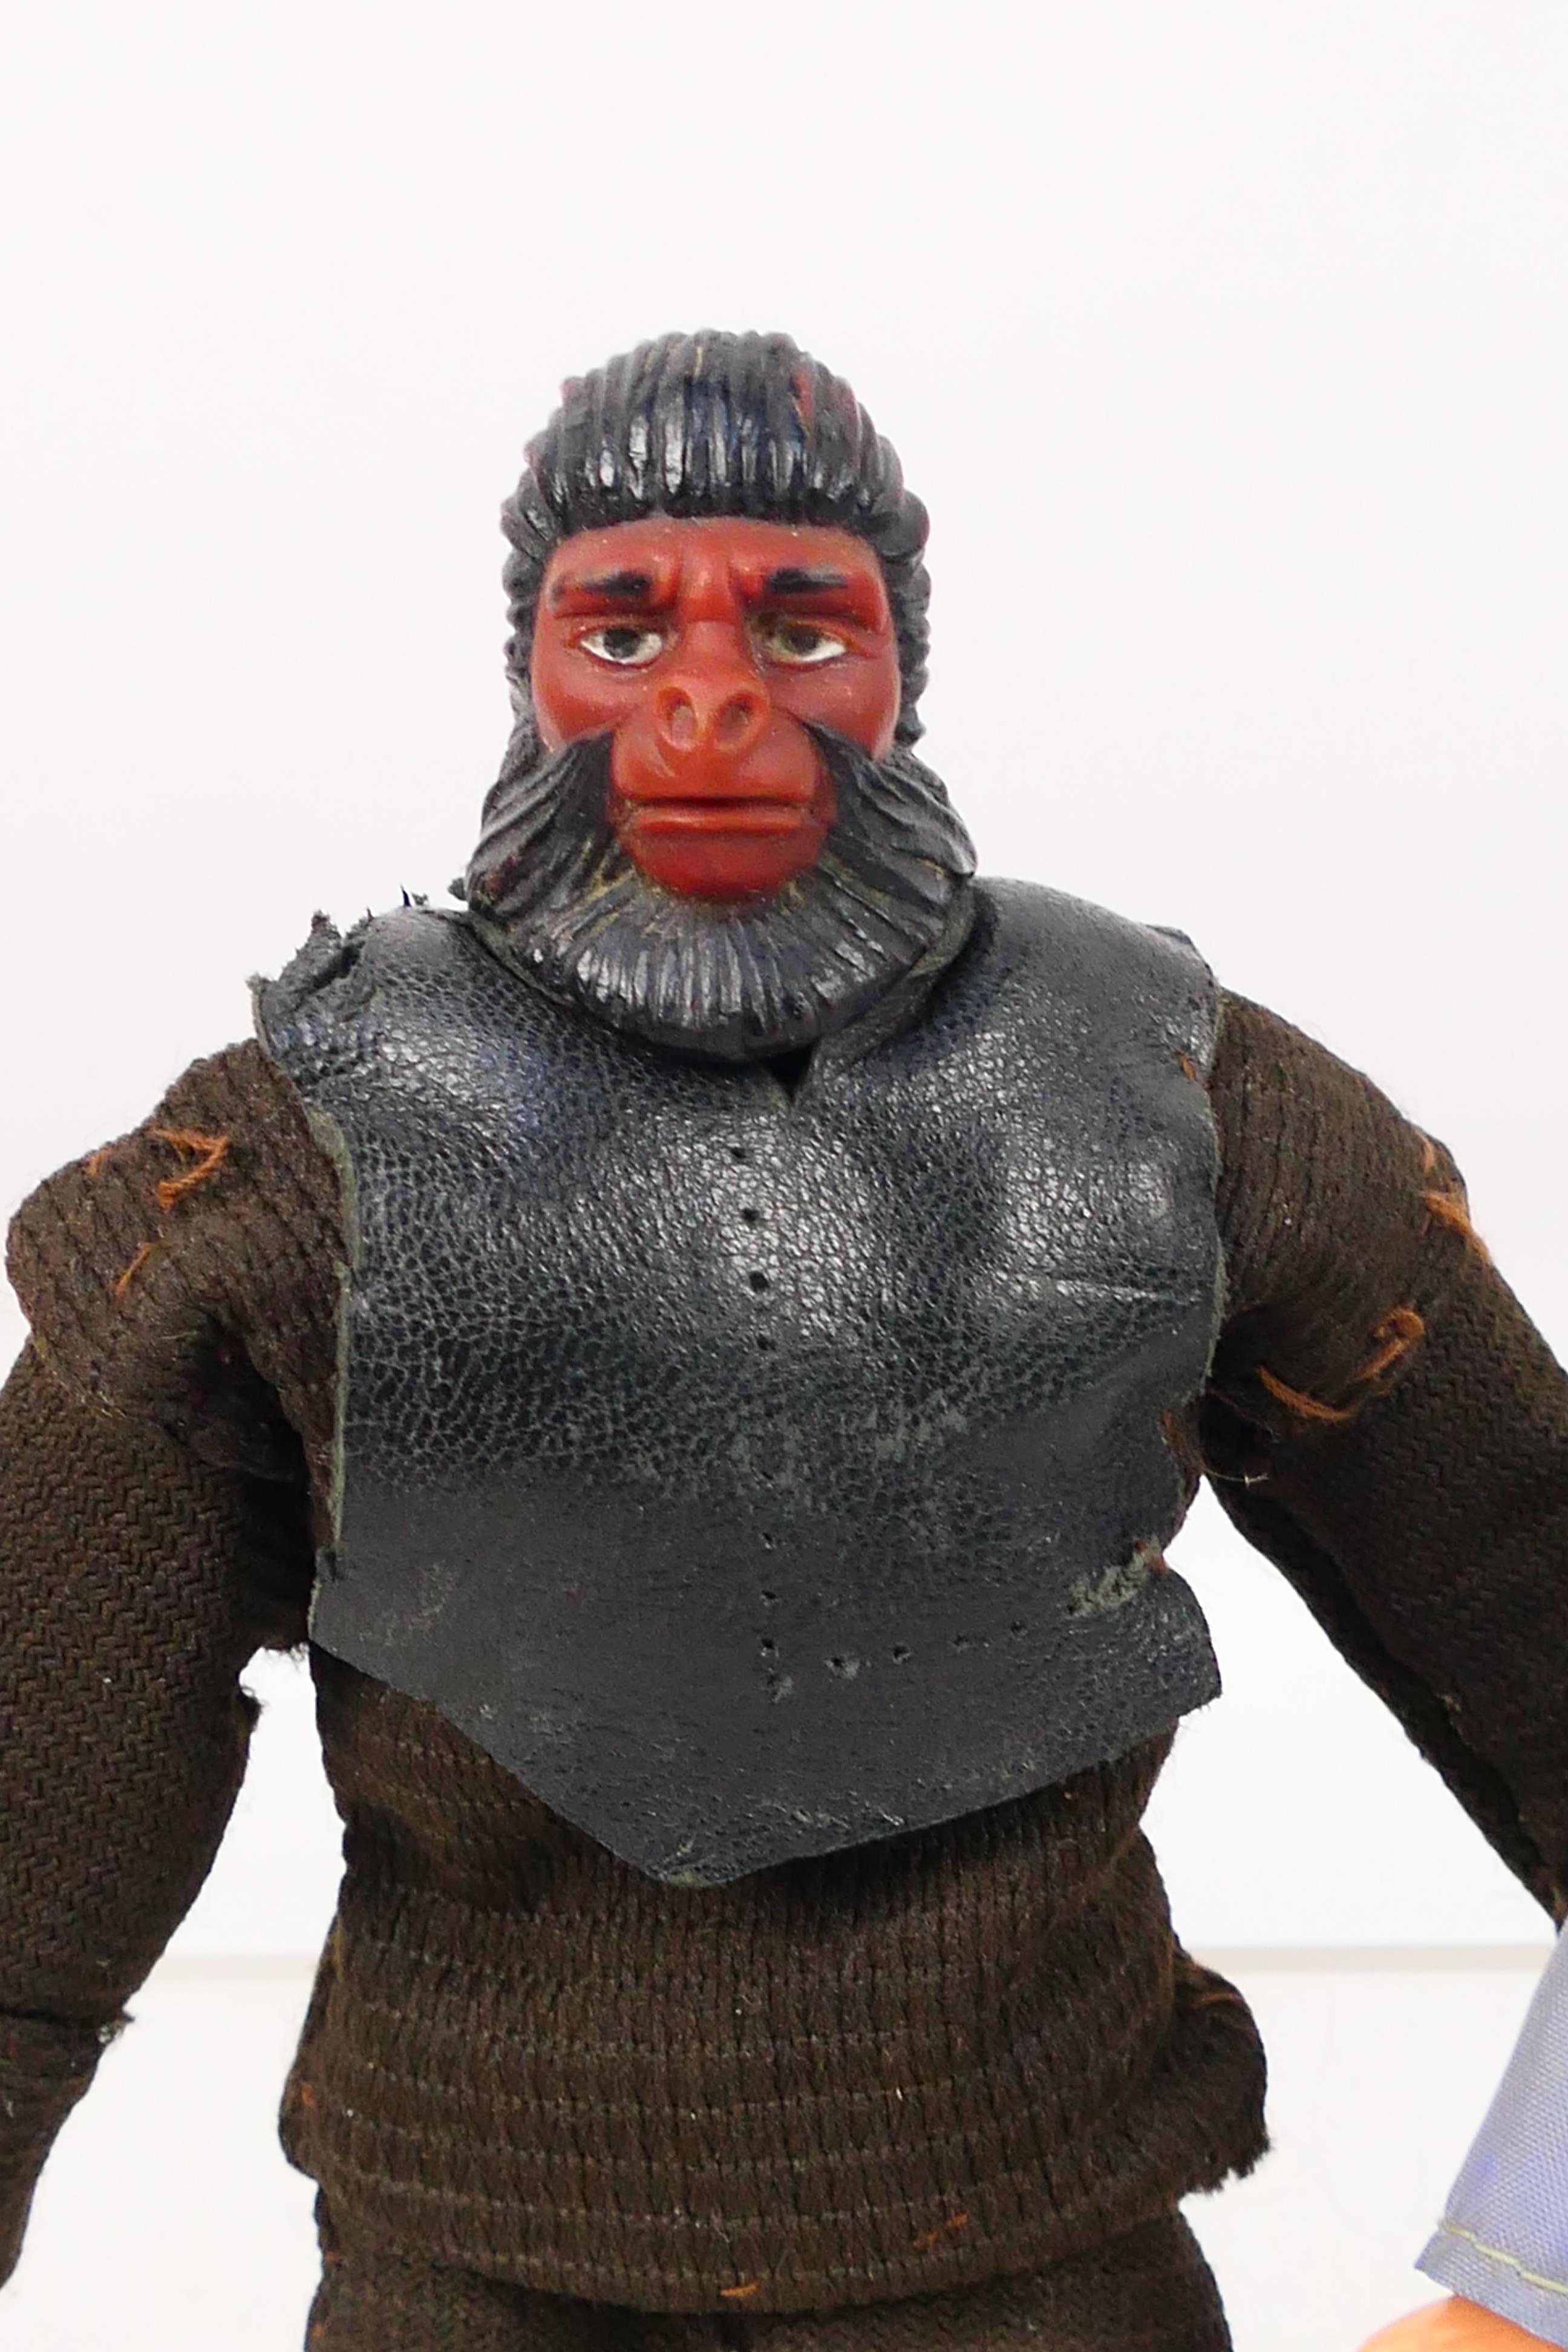 Mego Corp - Apjac - Planet of the Apes - A pair of 8" action figures from The Planet of The Apes - Image 3 of 6